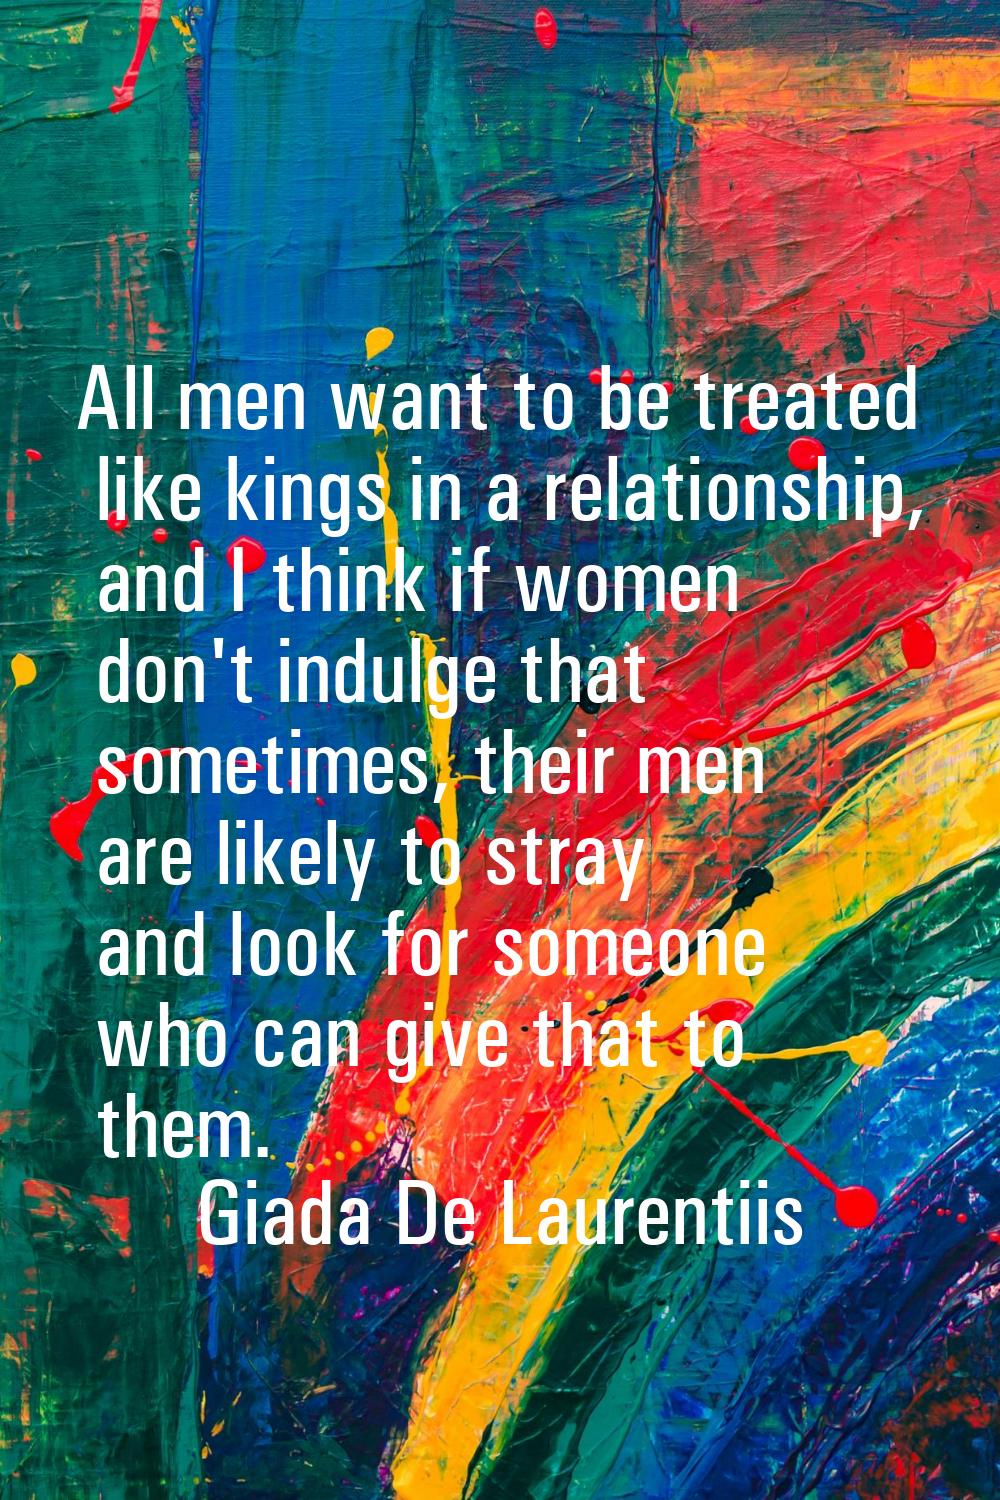 All men want to be treated like kings in a relationship, and I think if women don't indulge that so